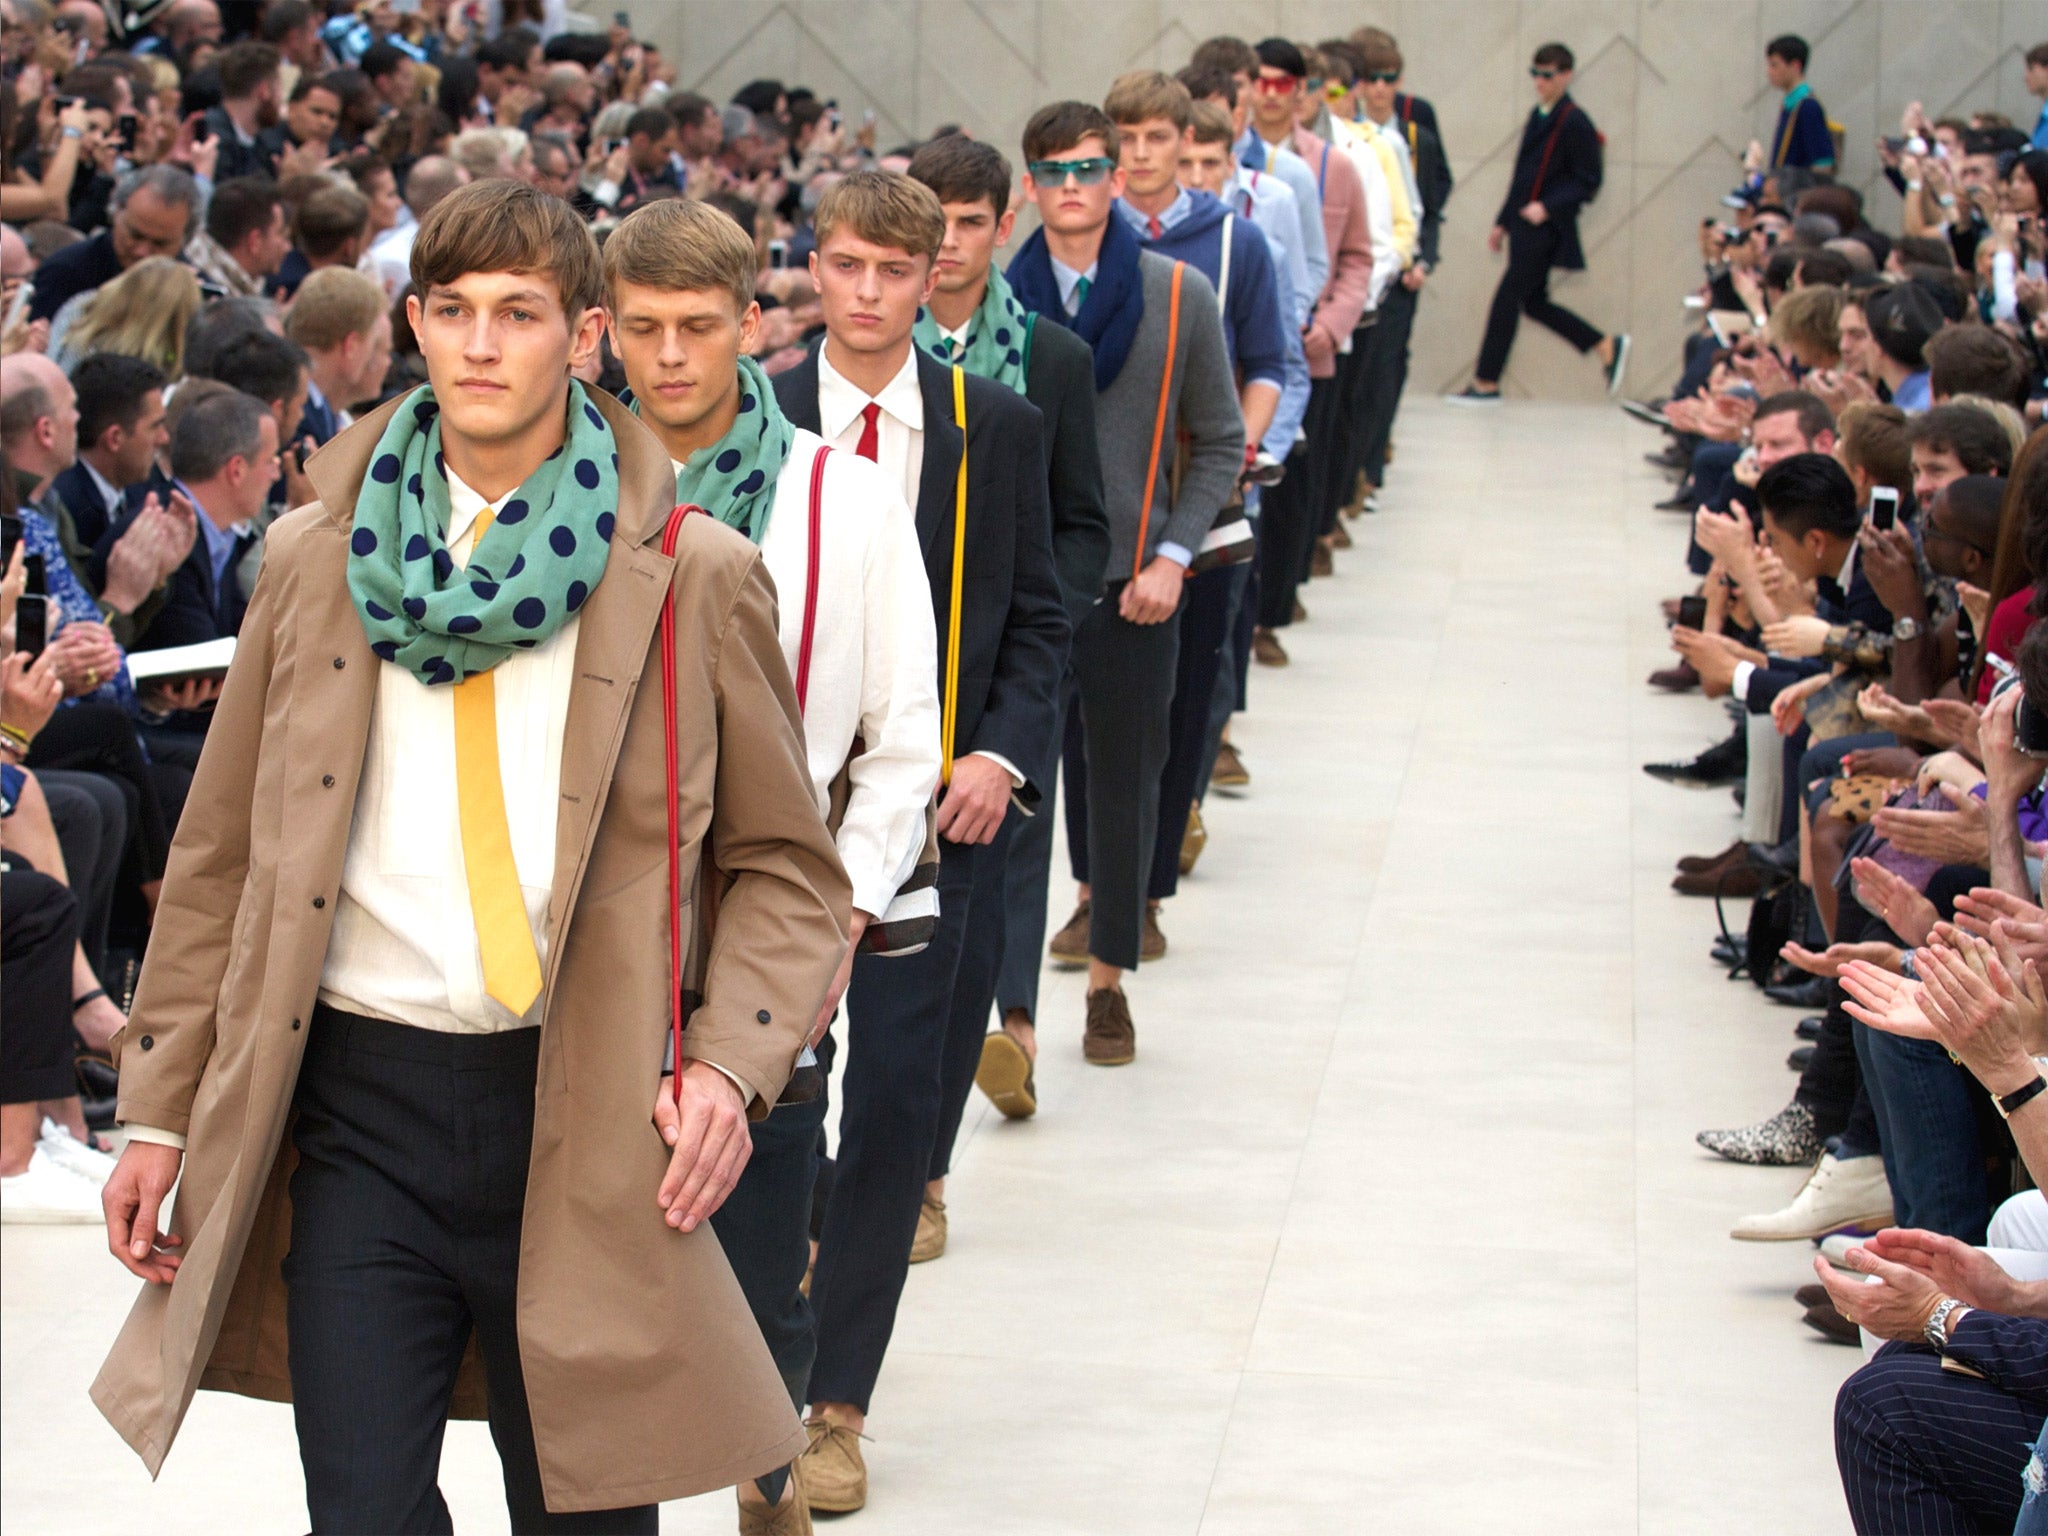 Models present creations by Burberry Prorsum during the Spring/Summer 2014 London Collections: Men fashion event in Kensington